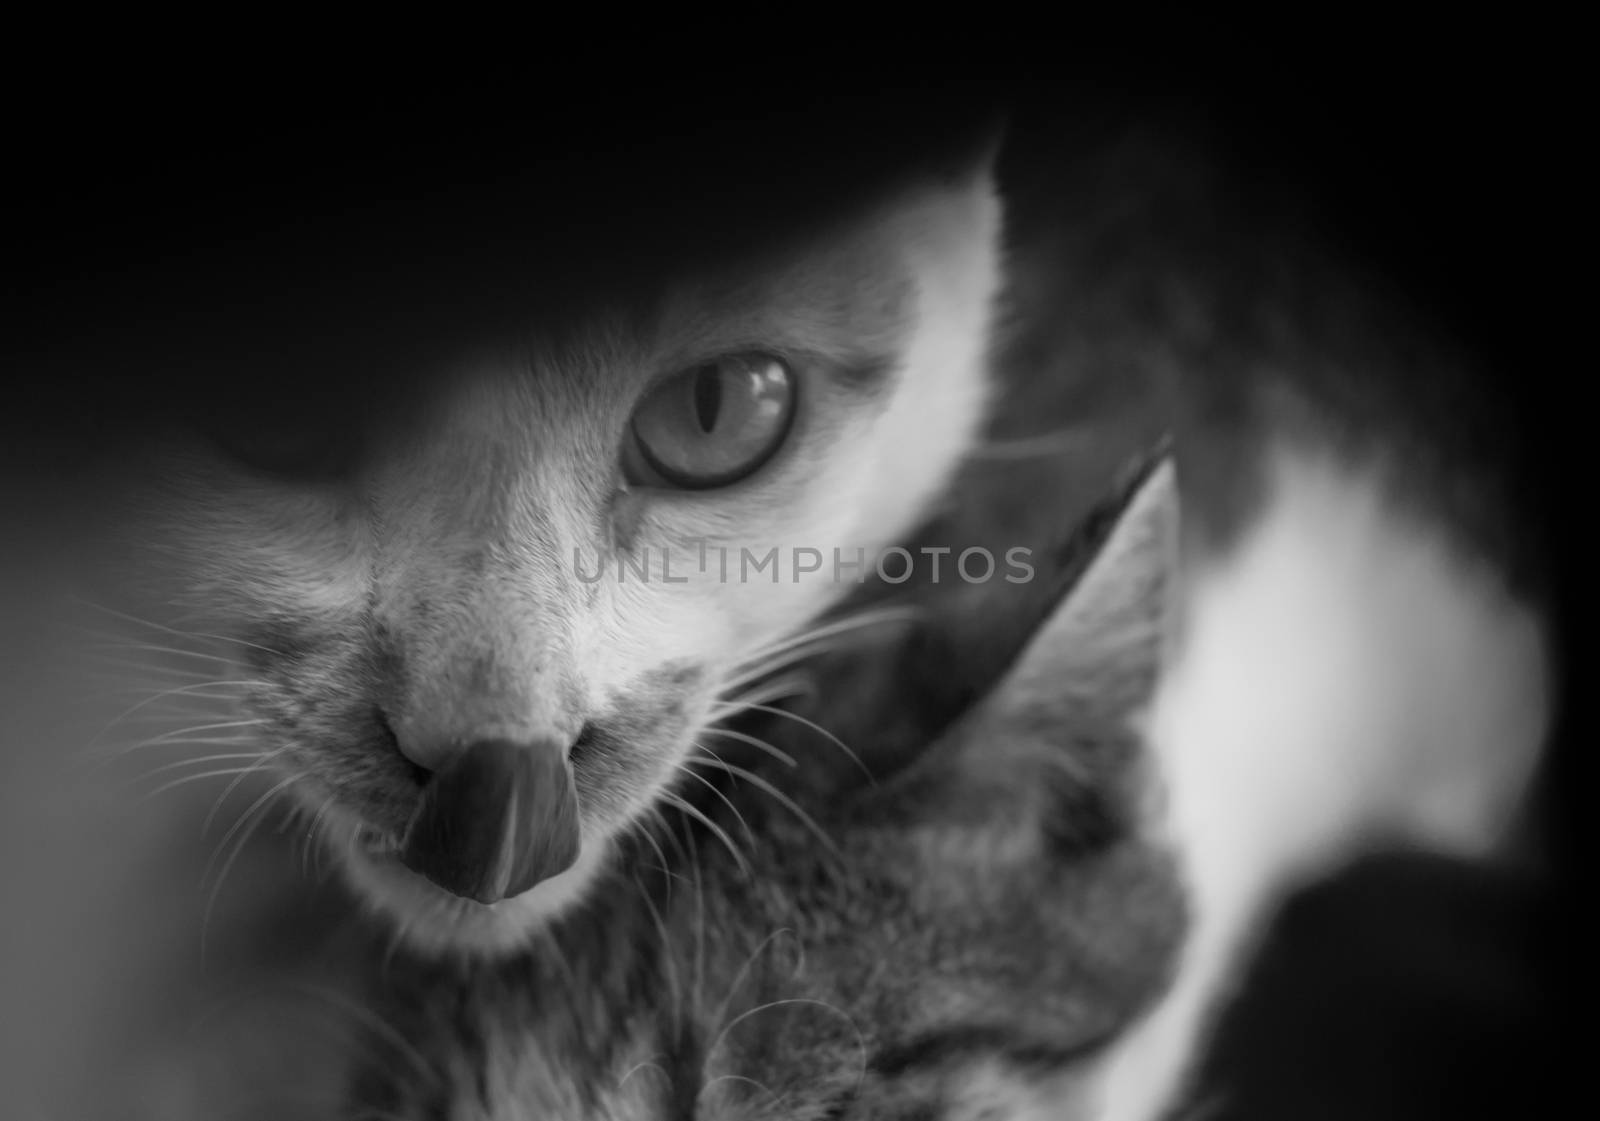 BLACK AND WHITE PHOTO OF CAT LICKING ITS LIP WHILE LOOKING AT CAMERA